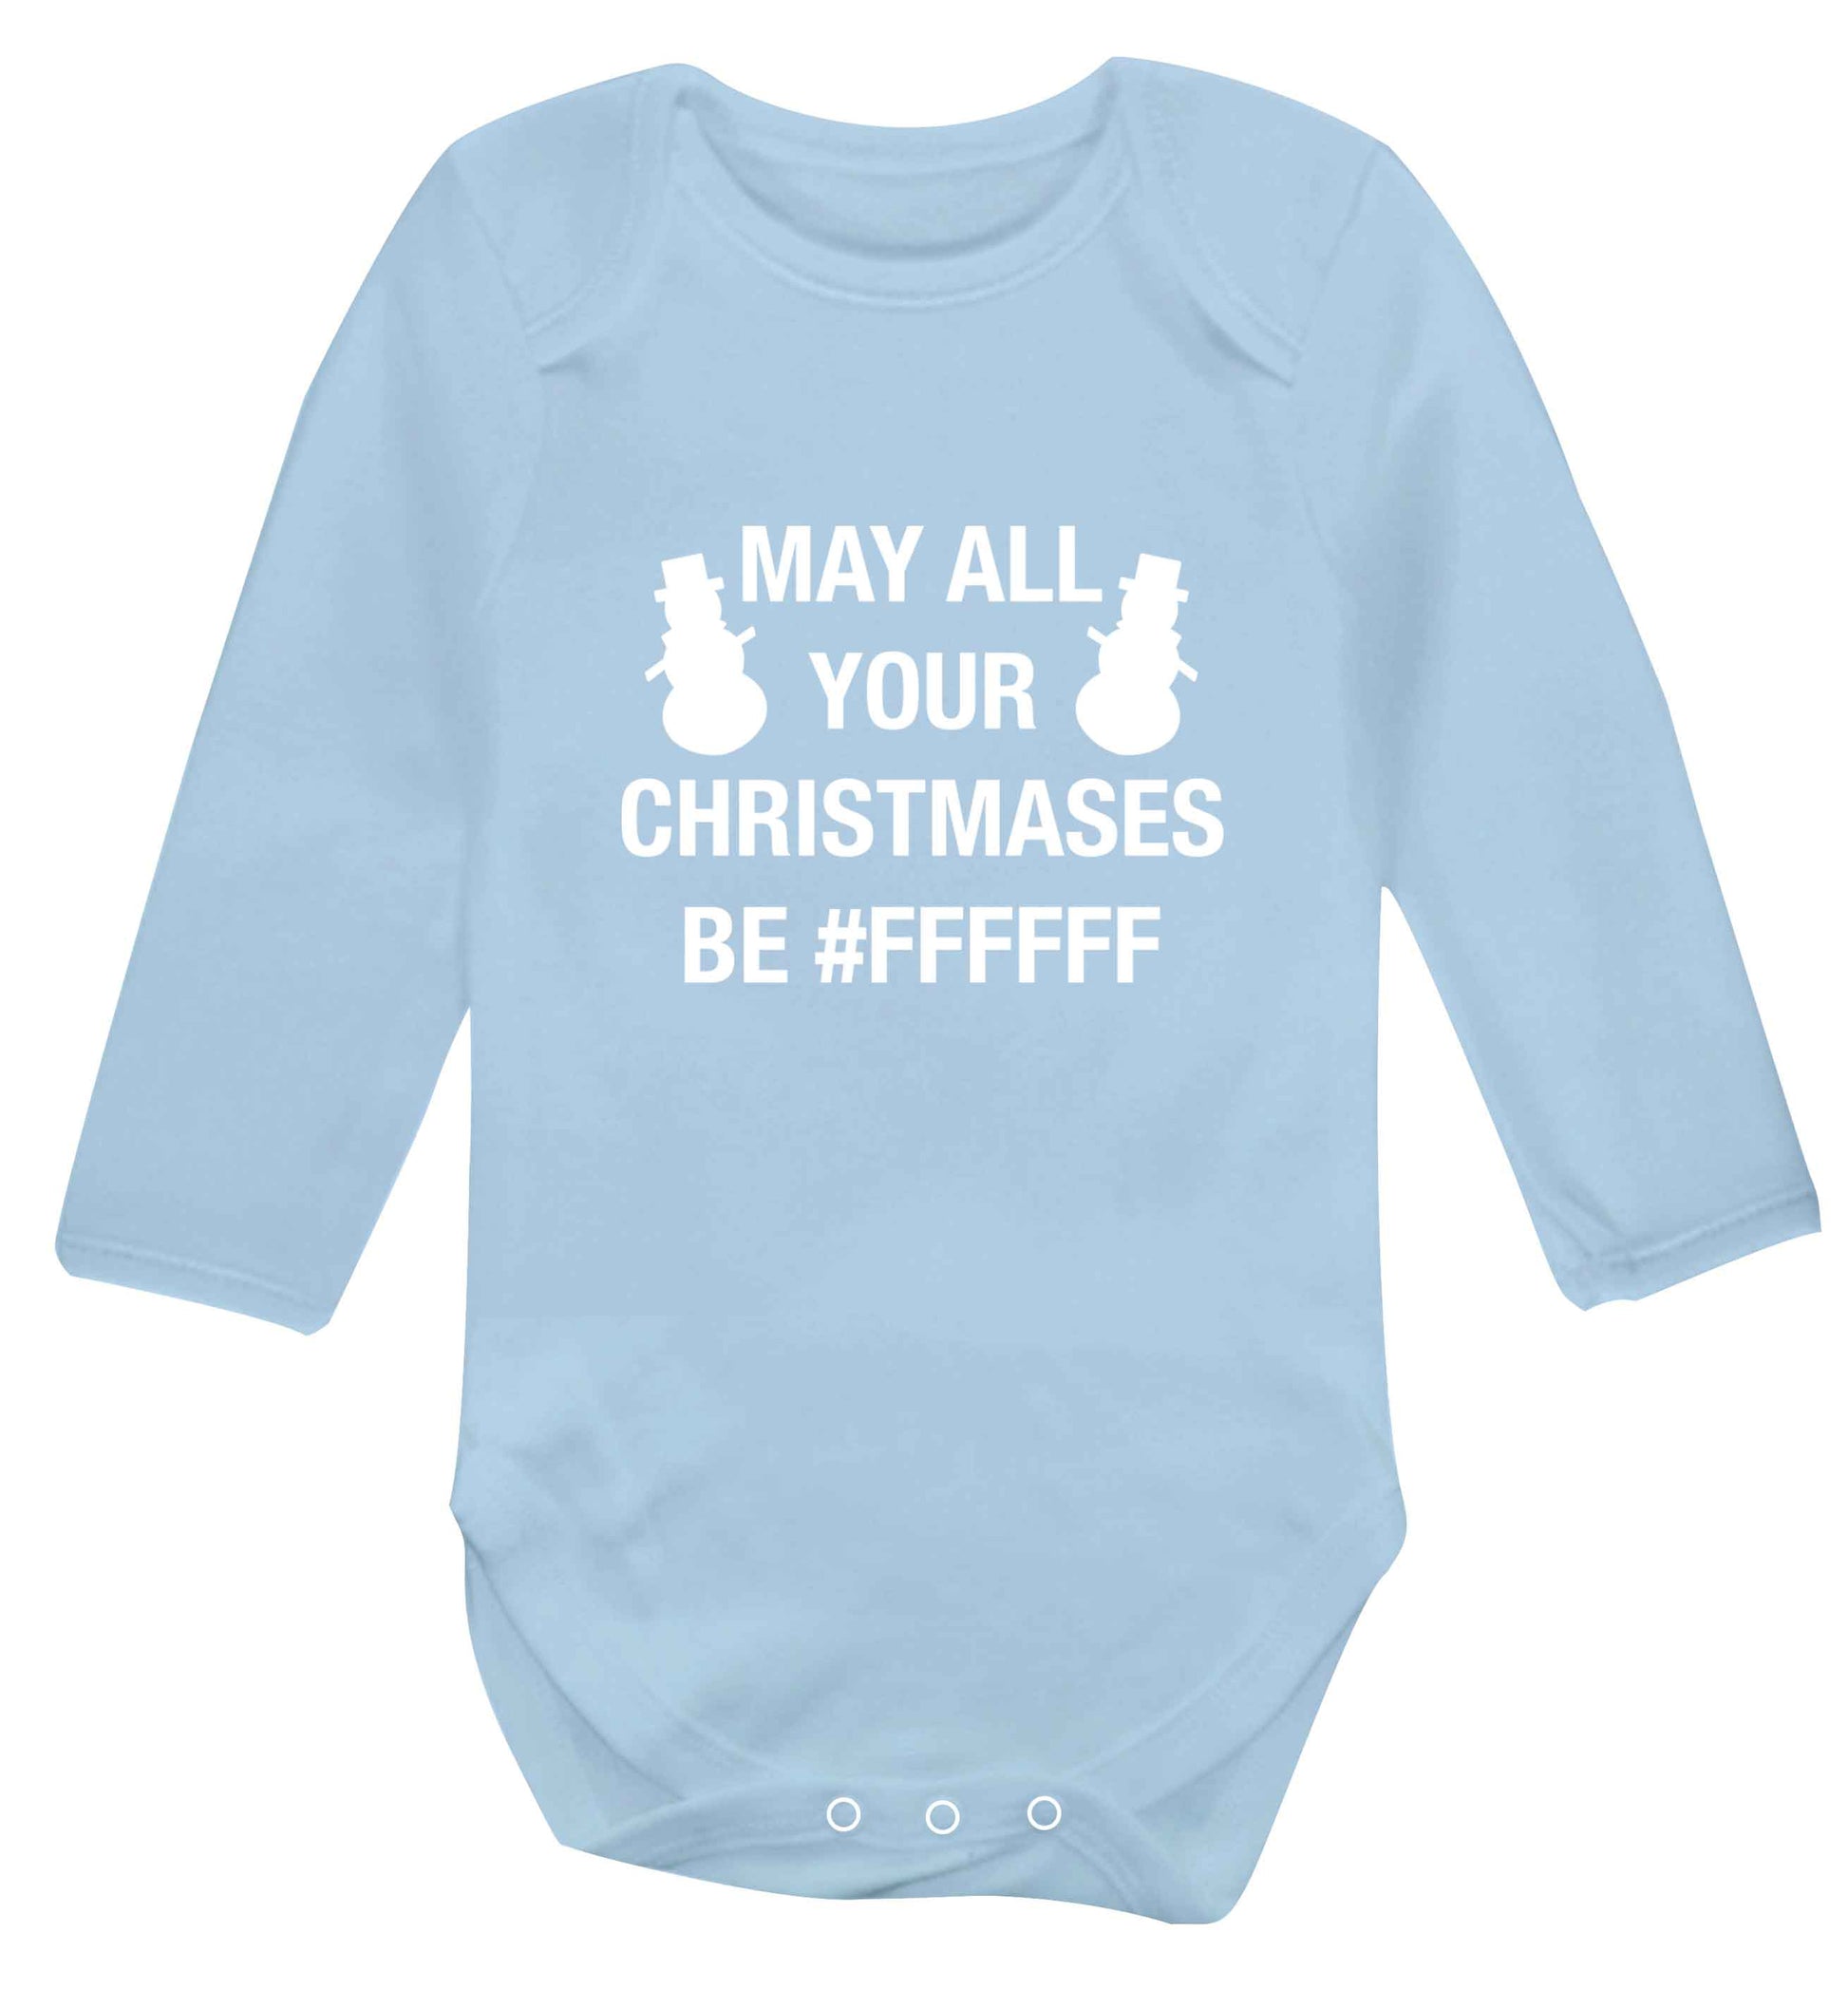 May all your Christmases be #FFFFFF baby vest long sleeved pale blue 6-12 months